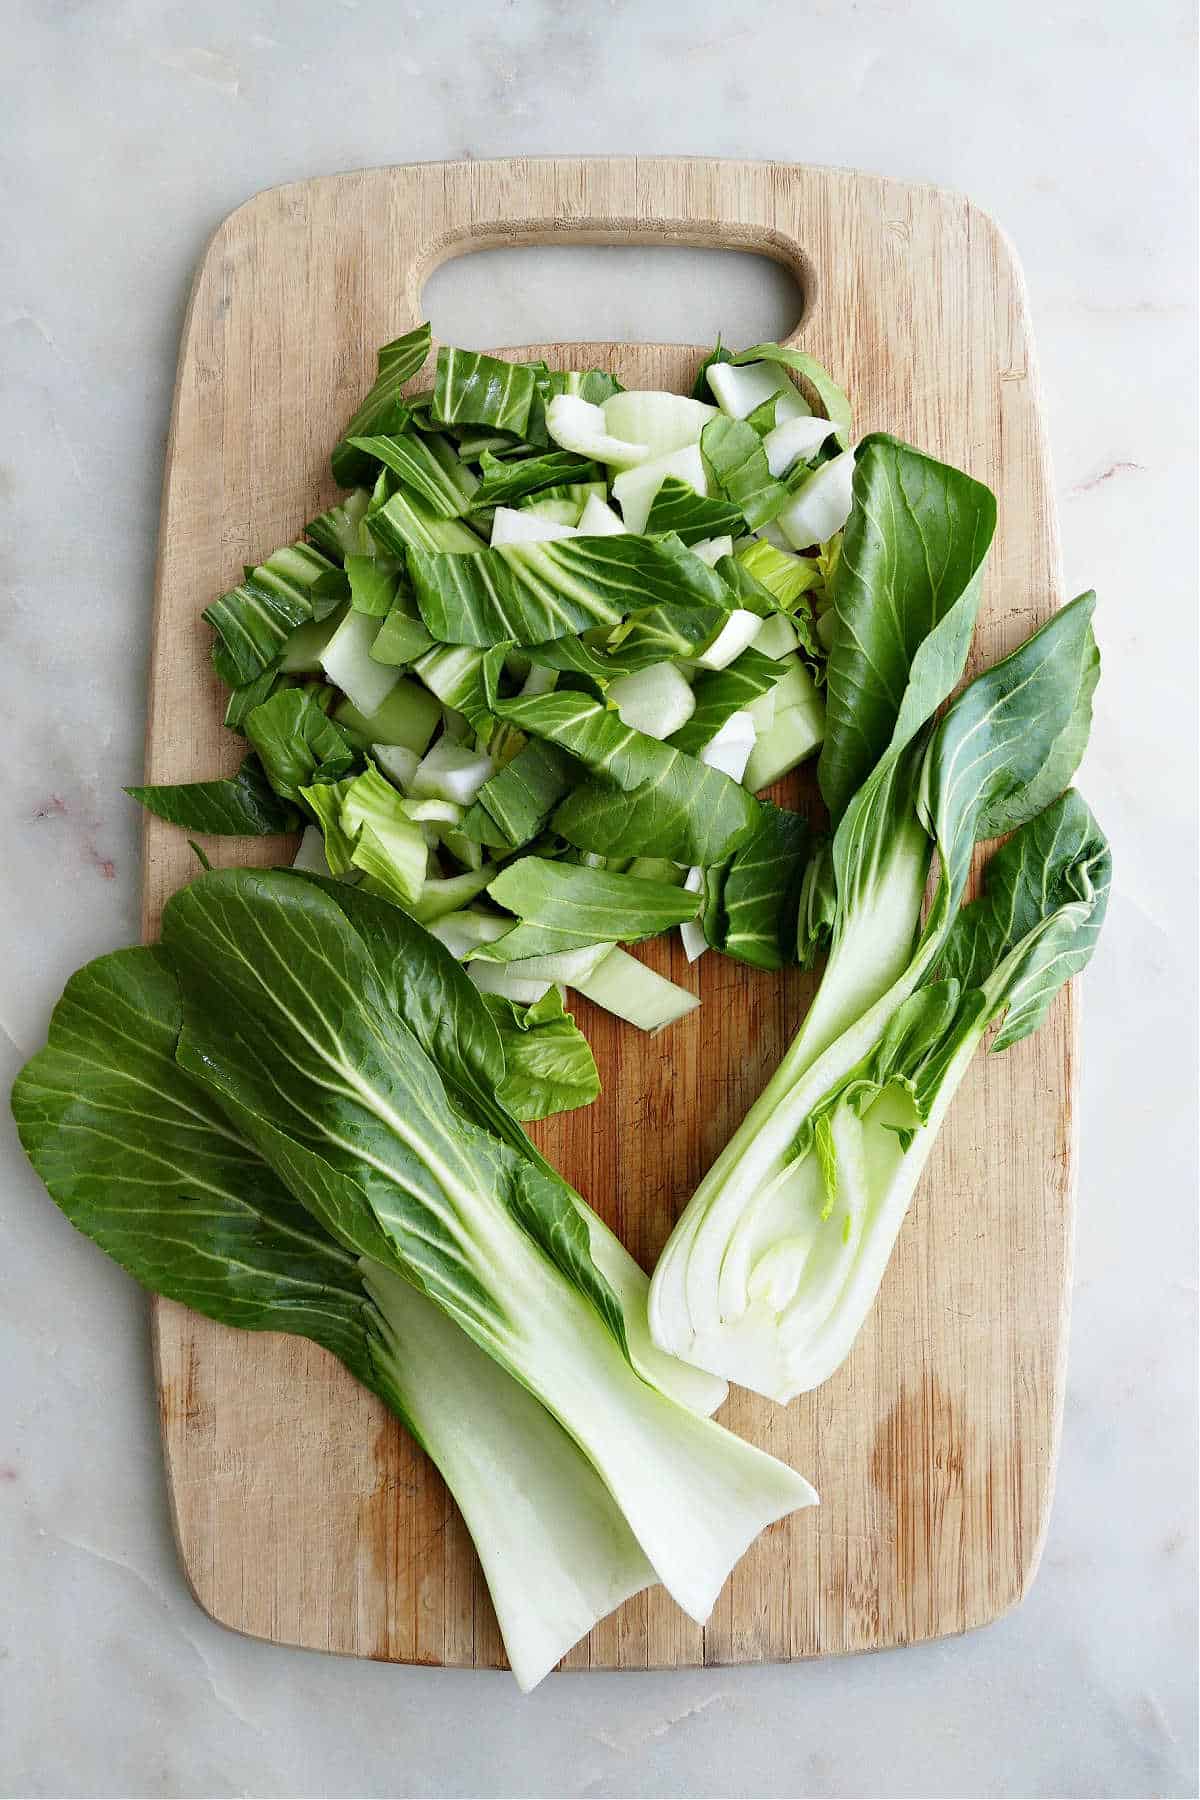 It's Worth Taking The Time To Properly Chop Veggies For Salad